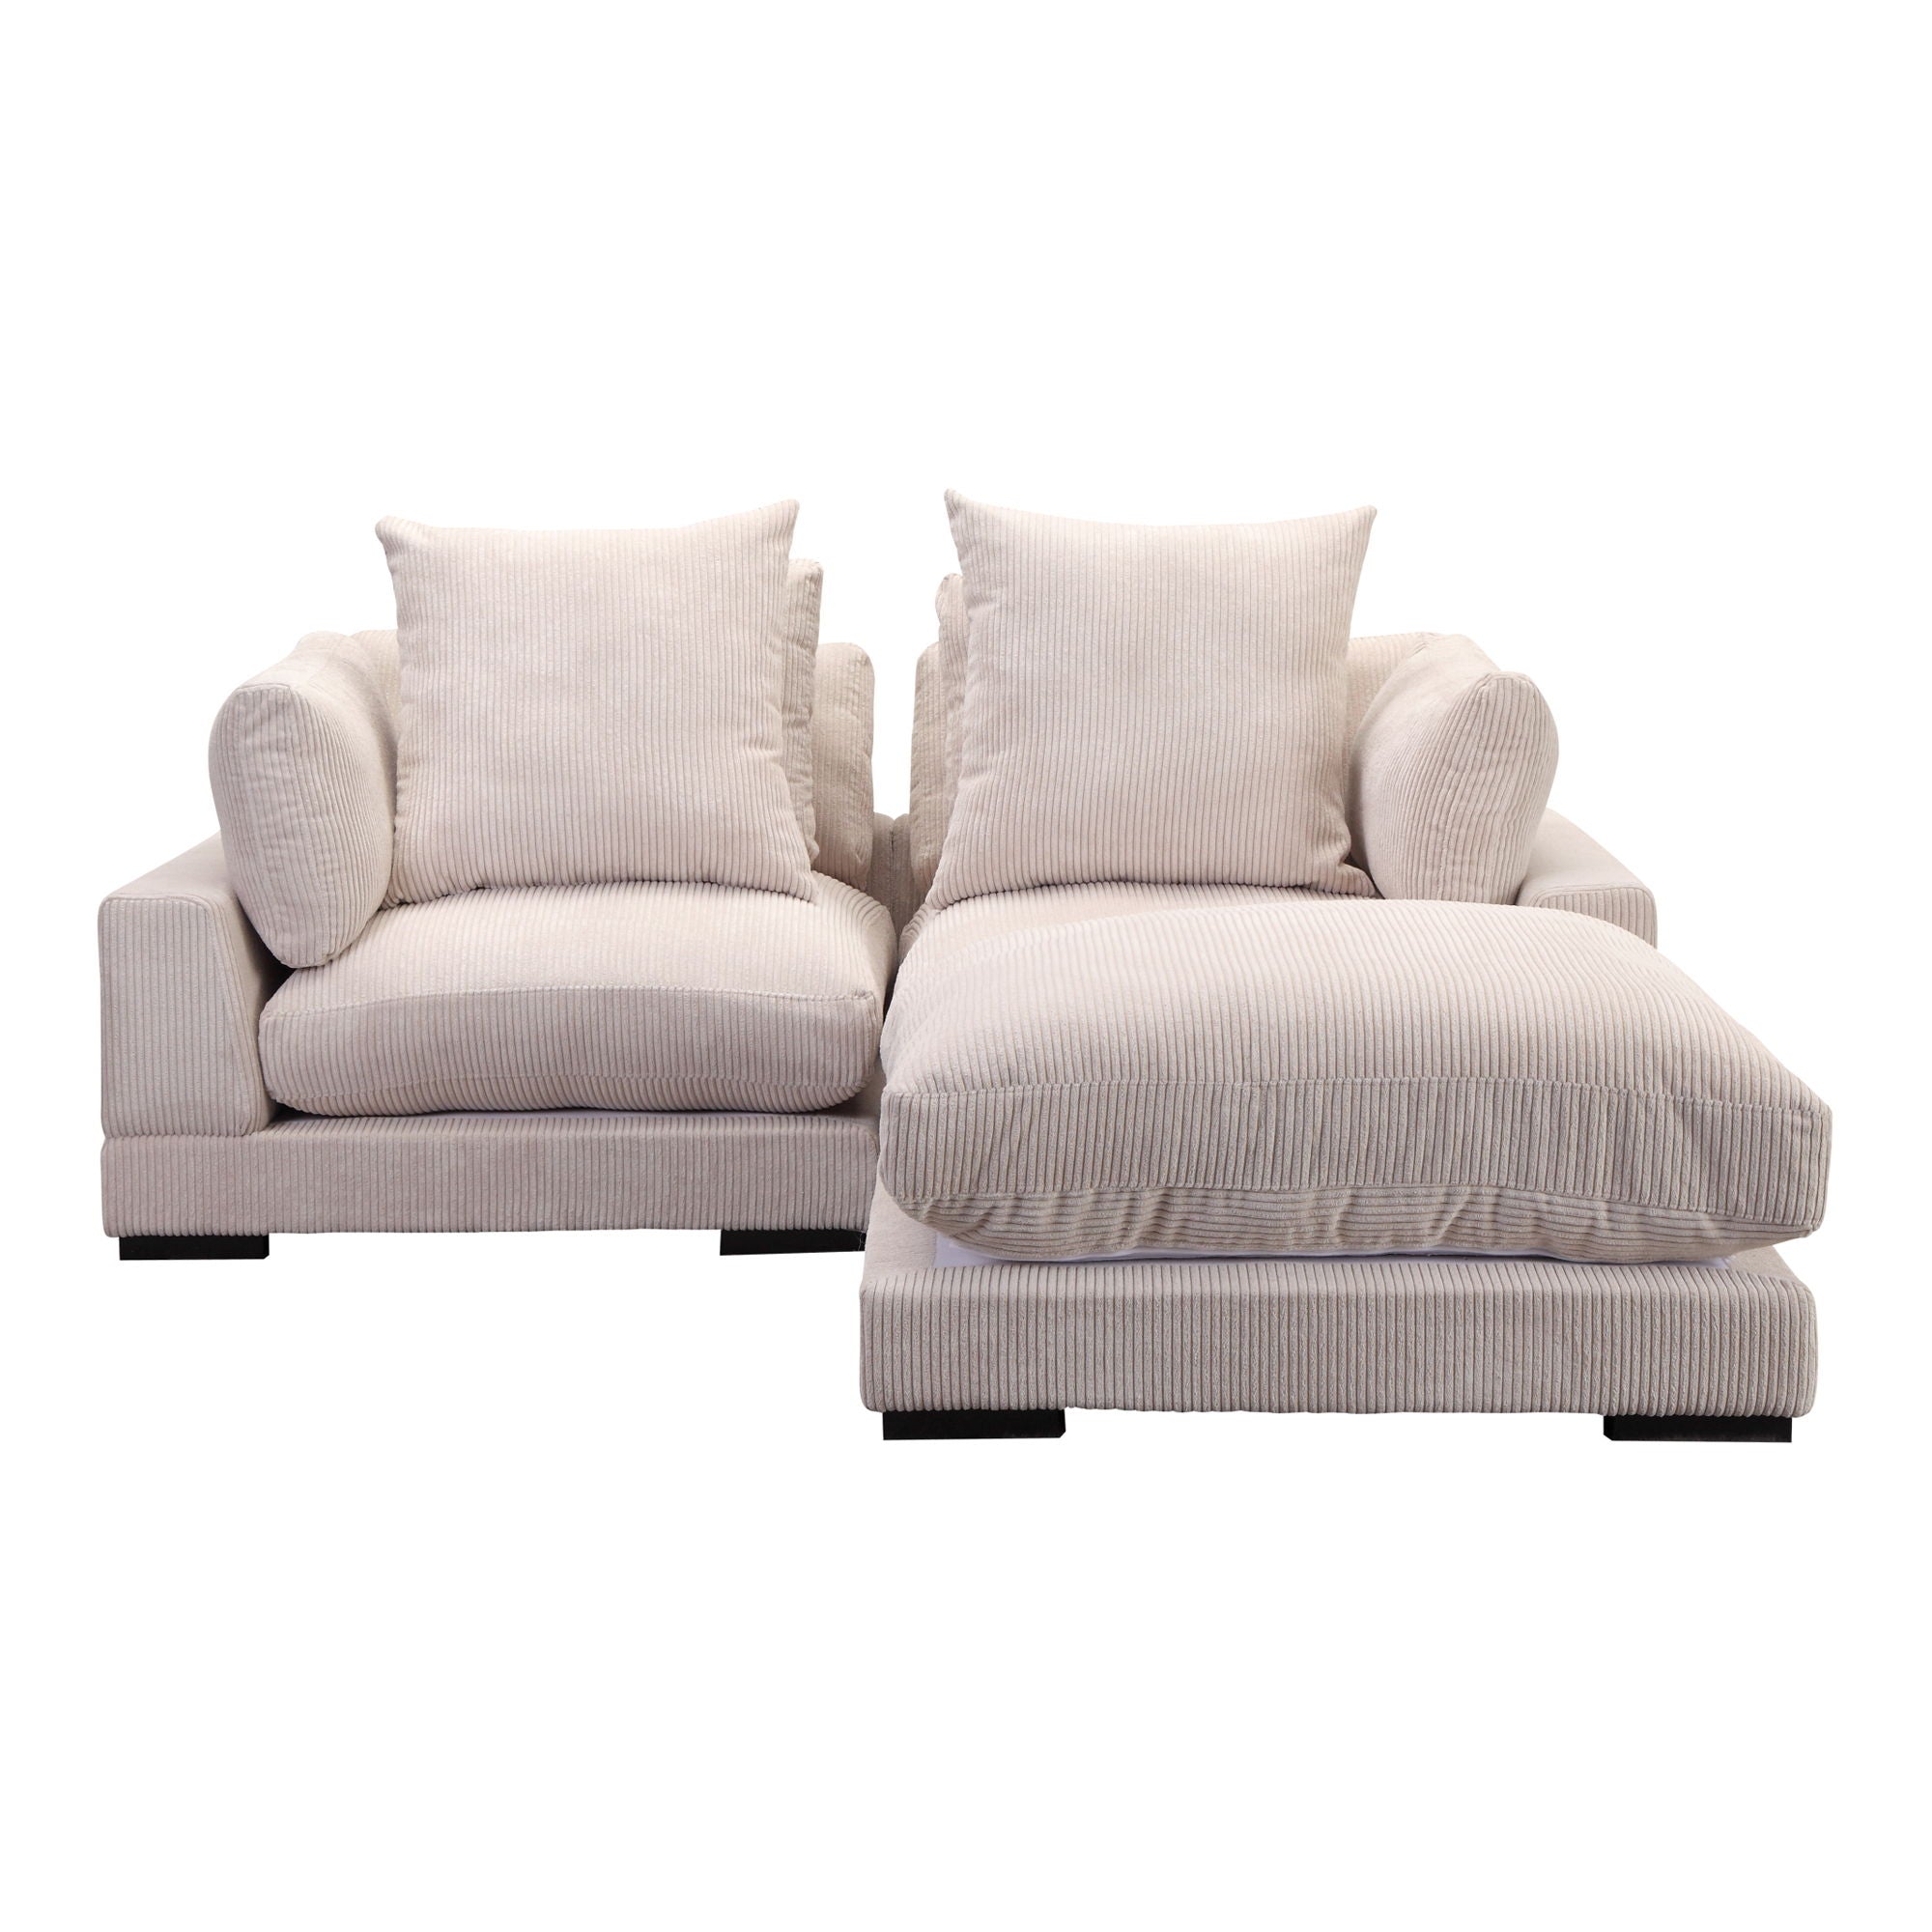 Tumble White Corduroy Modular Sectional-Stationary Sectionals-American Furniture Outlet